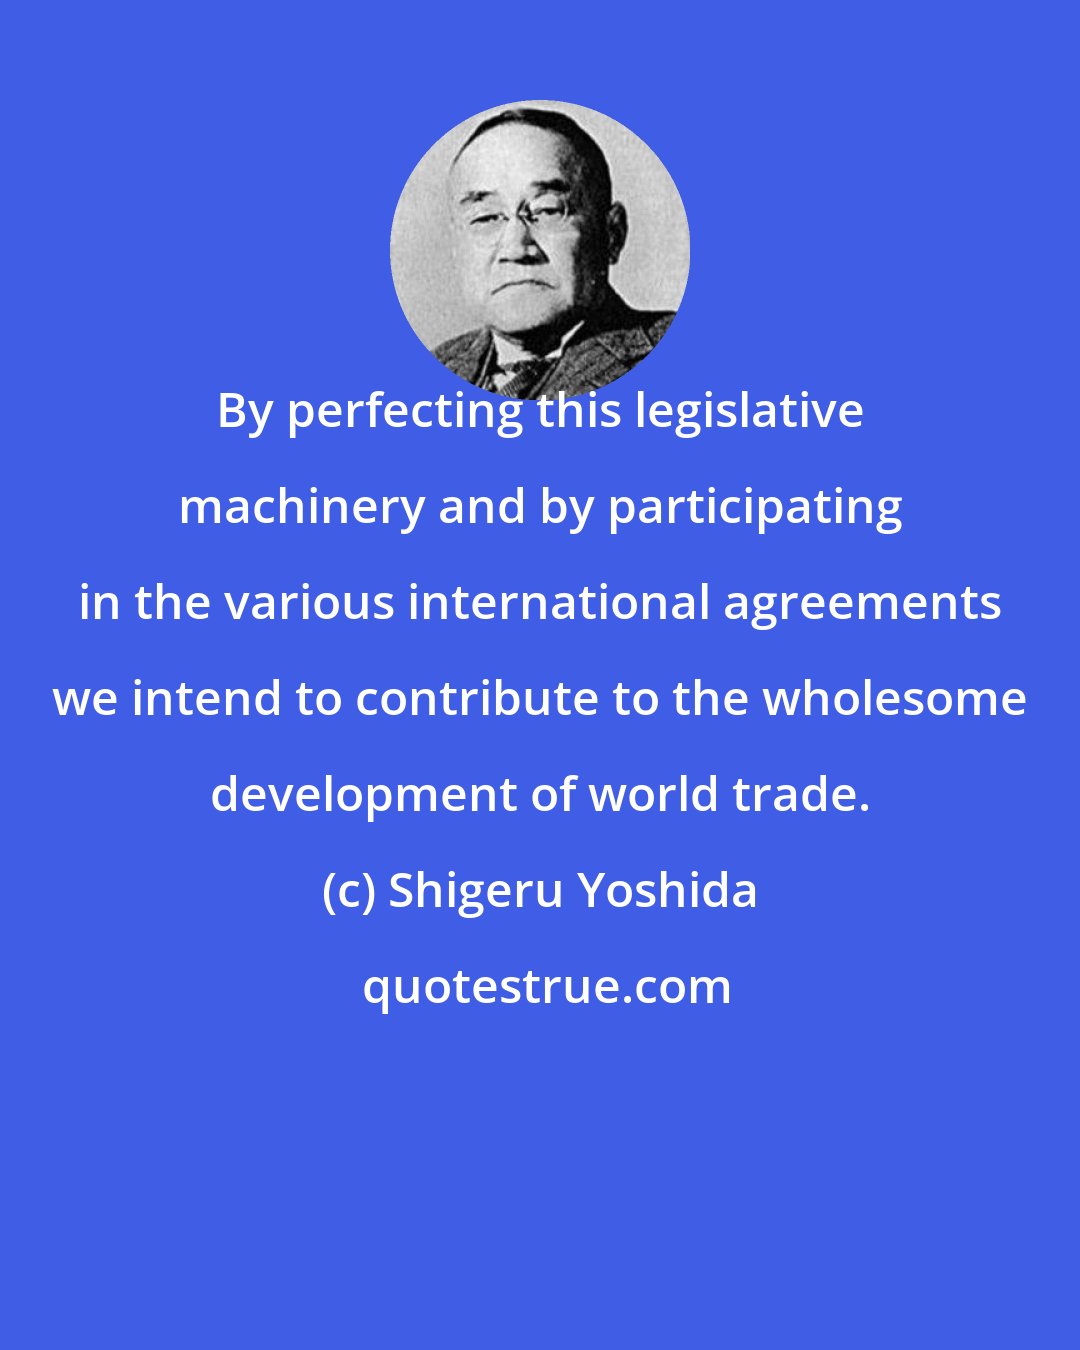 Shigeru Yoshida: By perfecting this legislative machinery and by participating in the various international agreements we intend to contribute to the wholesome development of world trade.